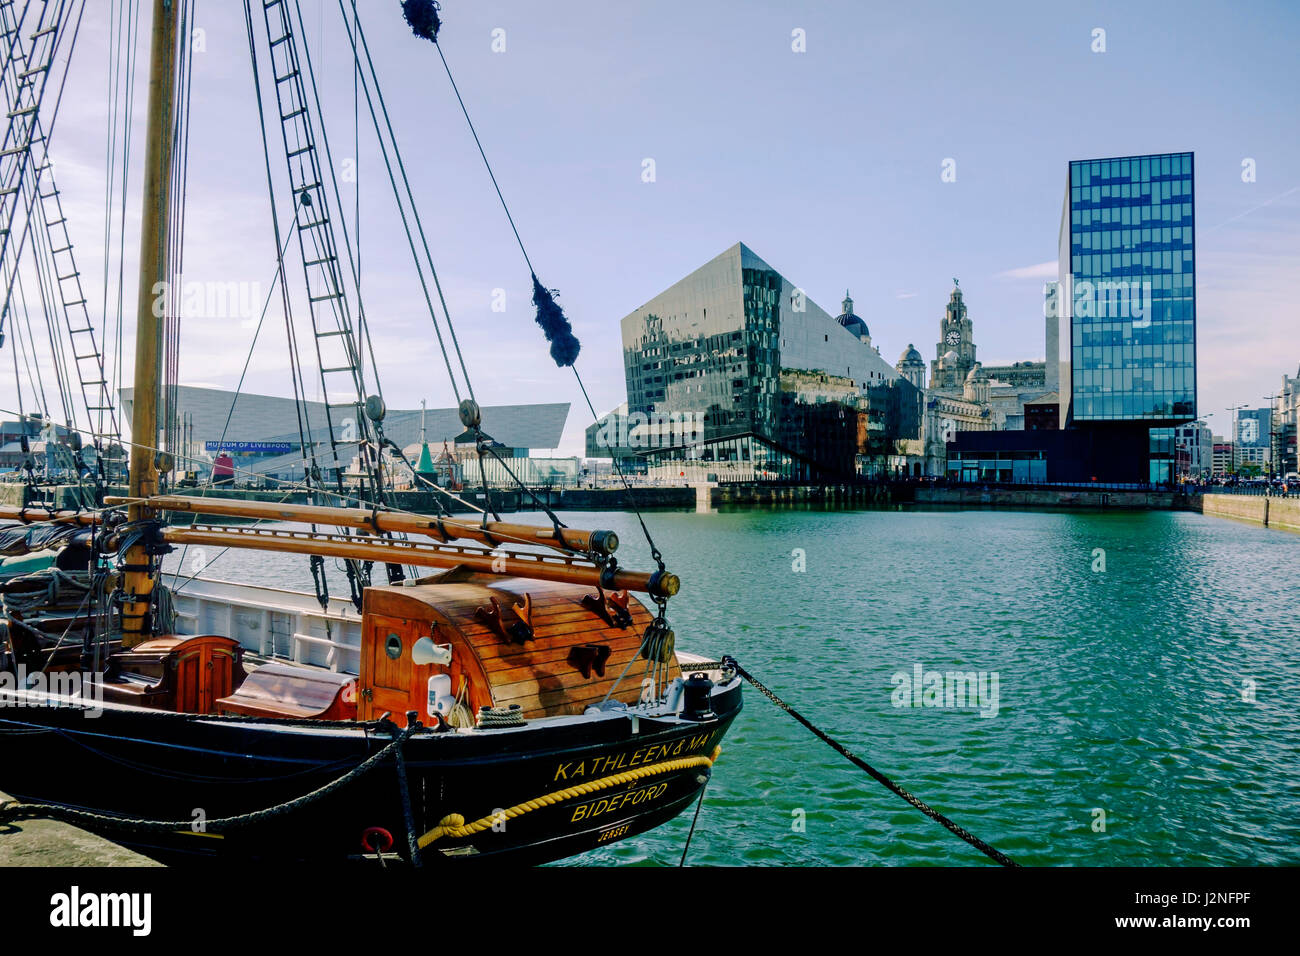 Old sailing ship in Canning Dock, Liverpool with view of modern buildings. Stock Photo